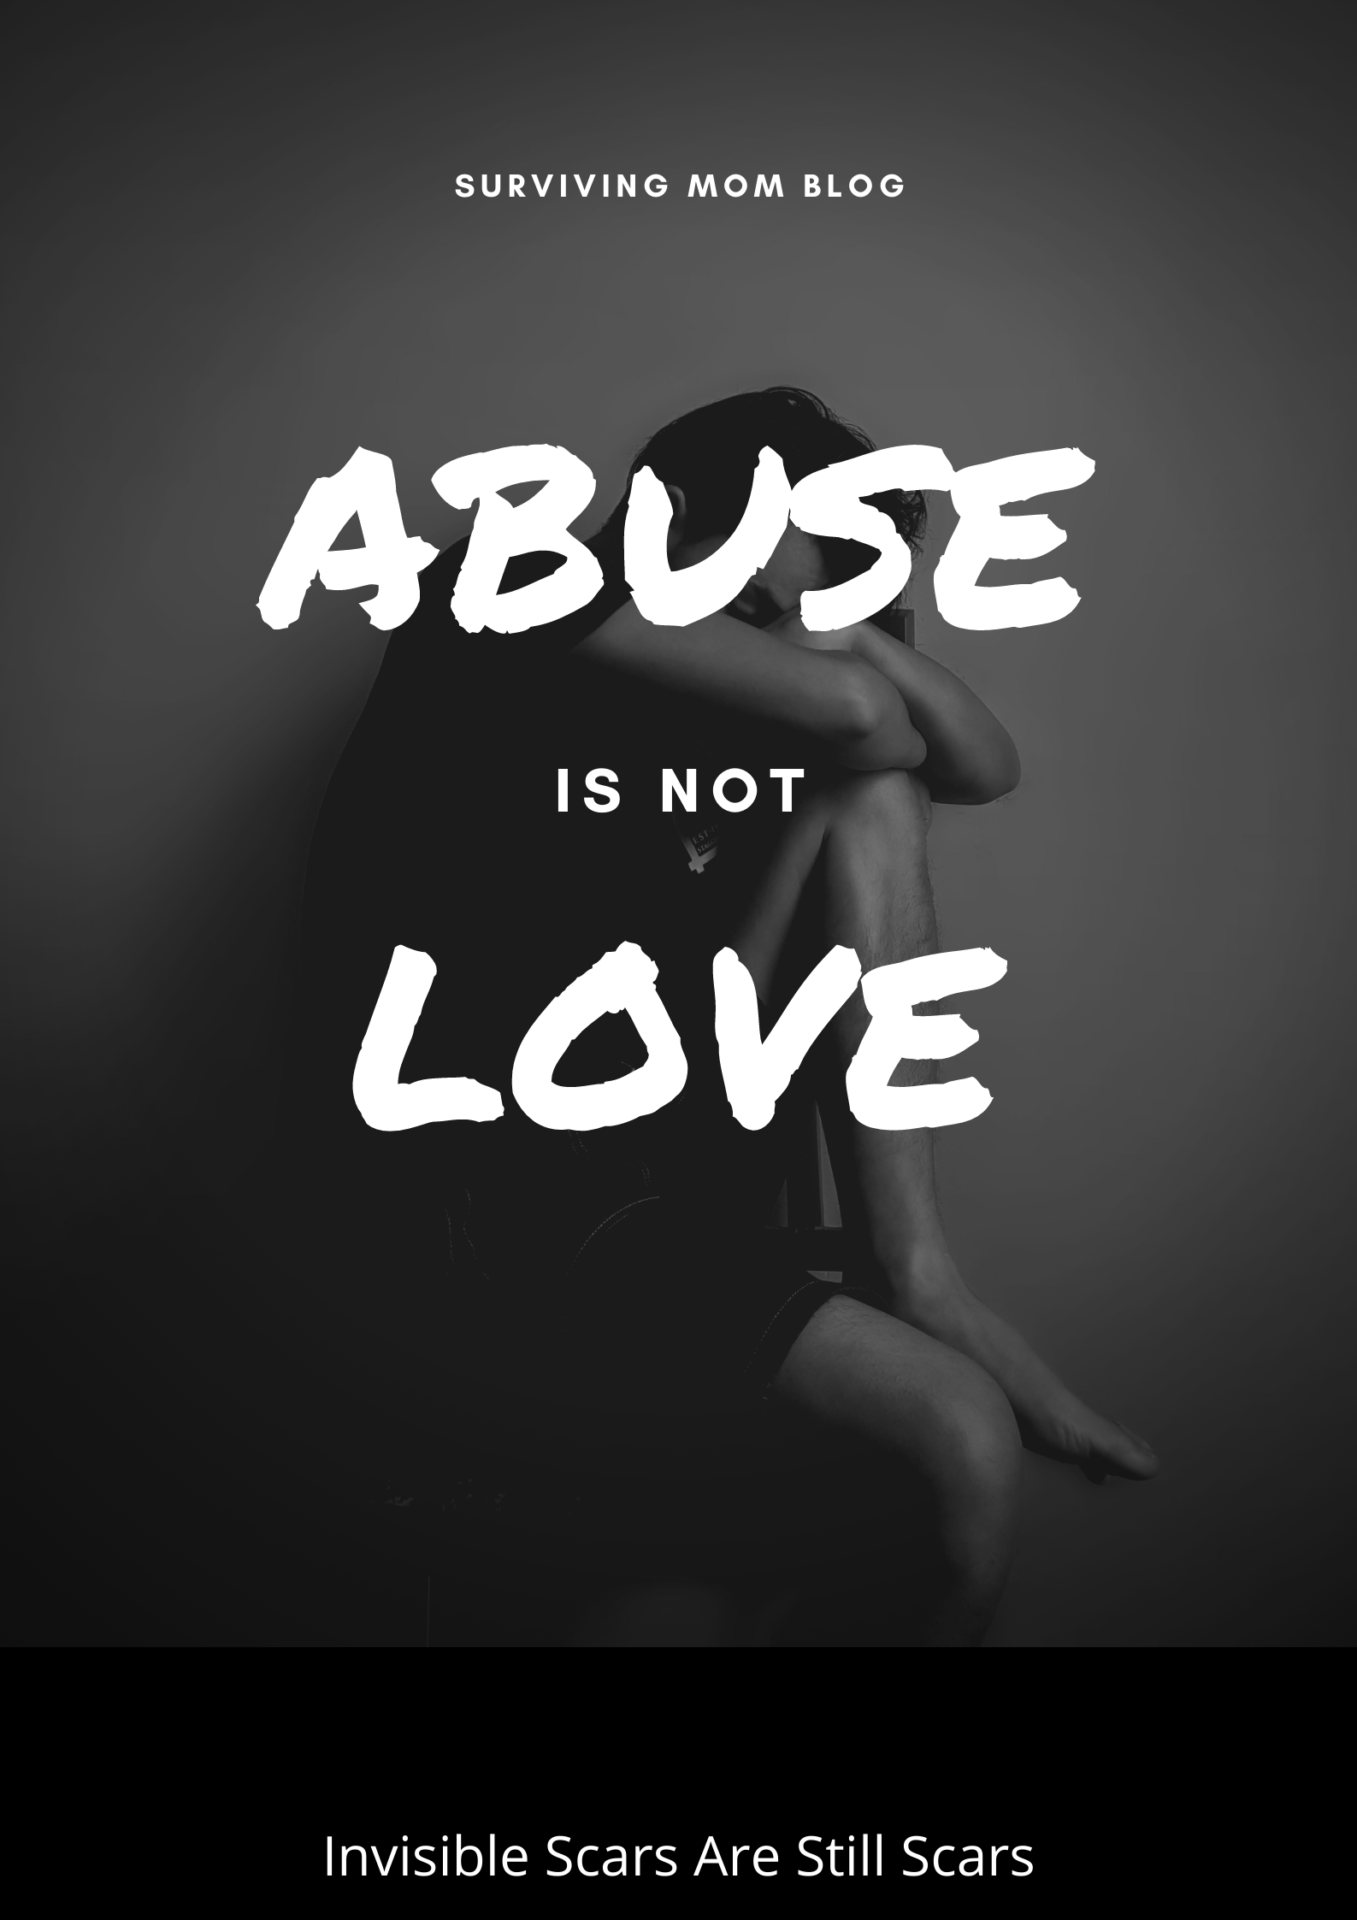 My Story: Surviving Narcissistic Emotional and Psychological Abuse